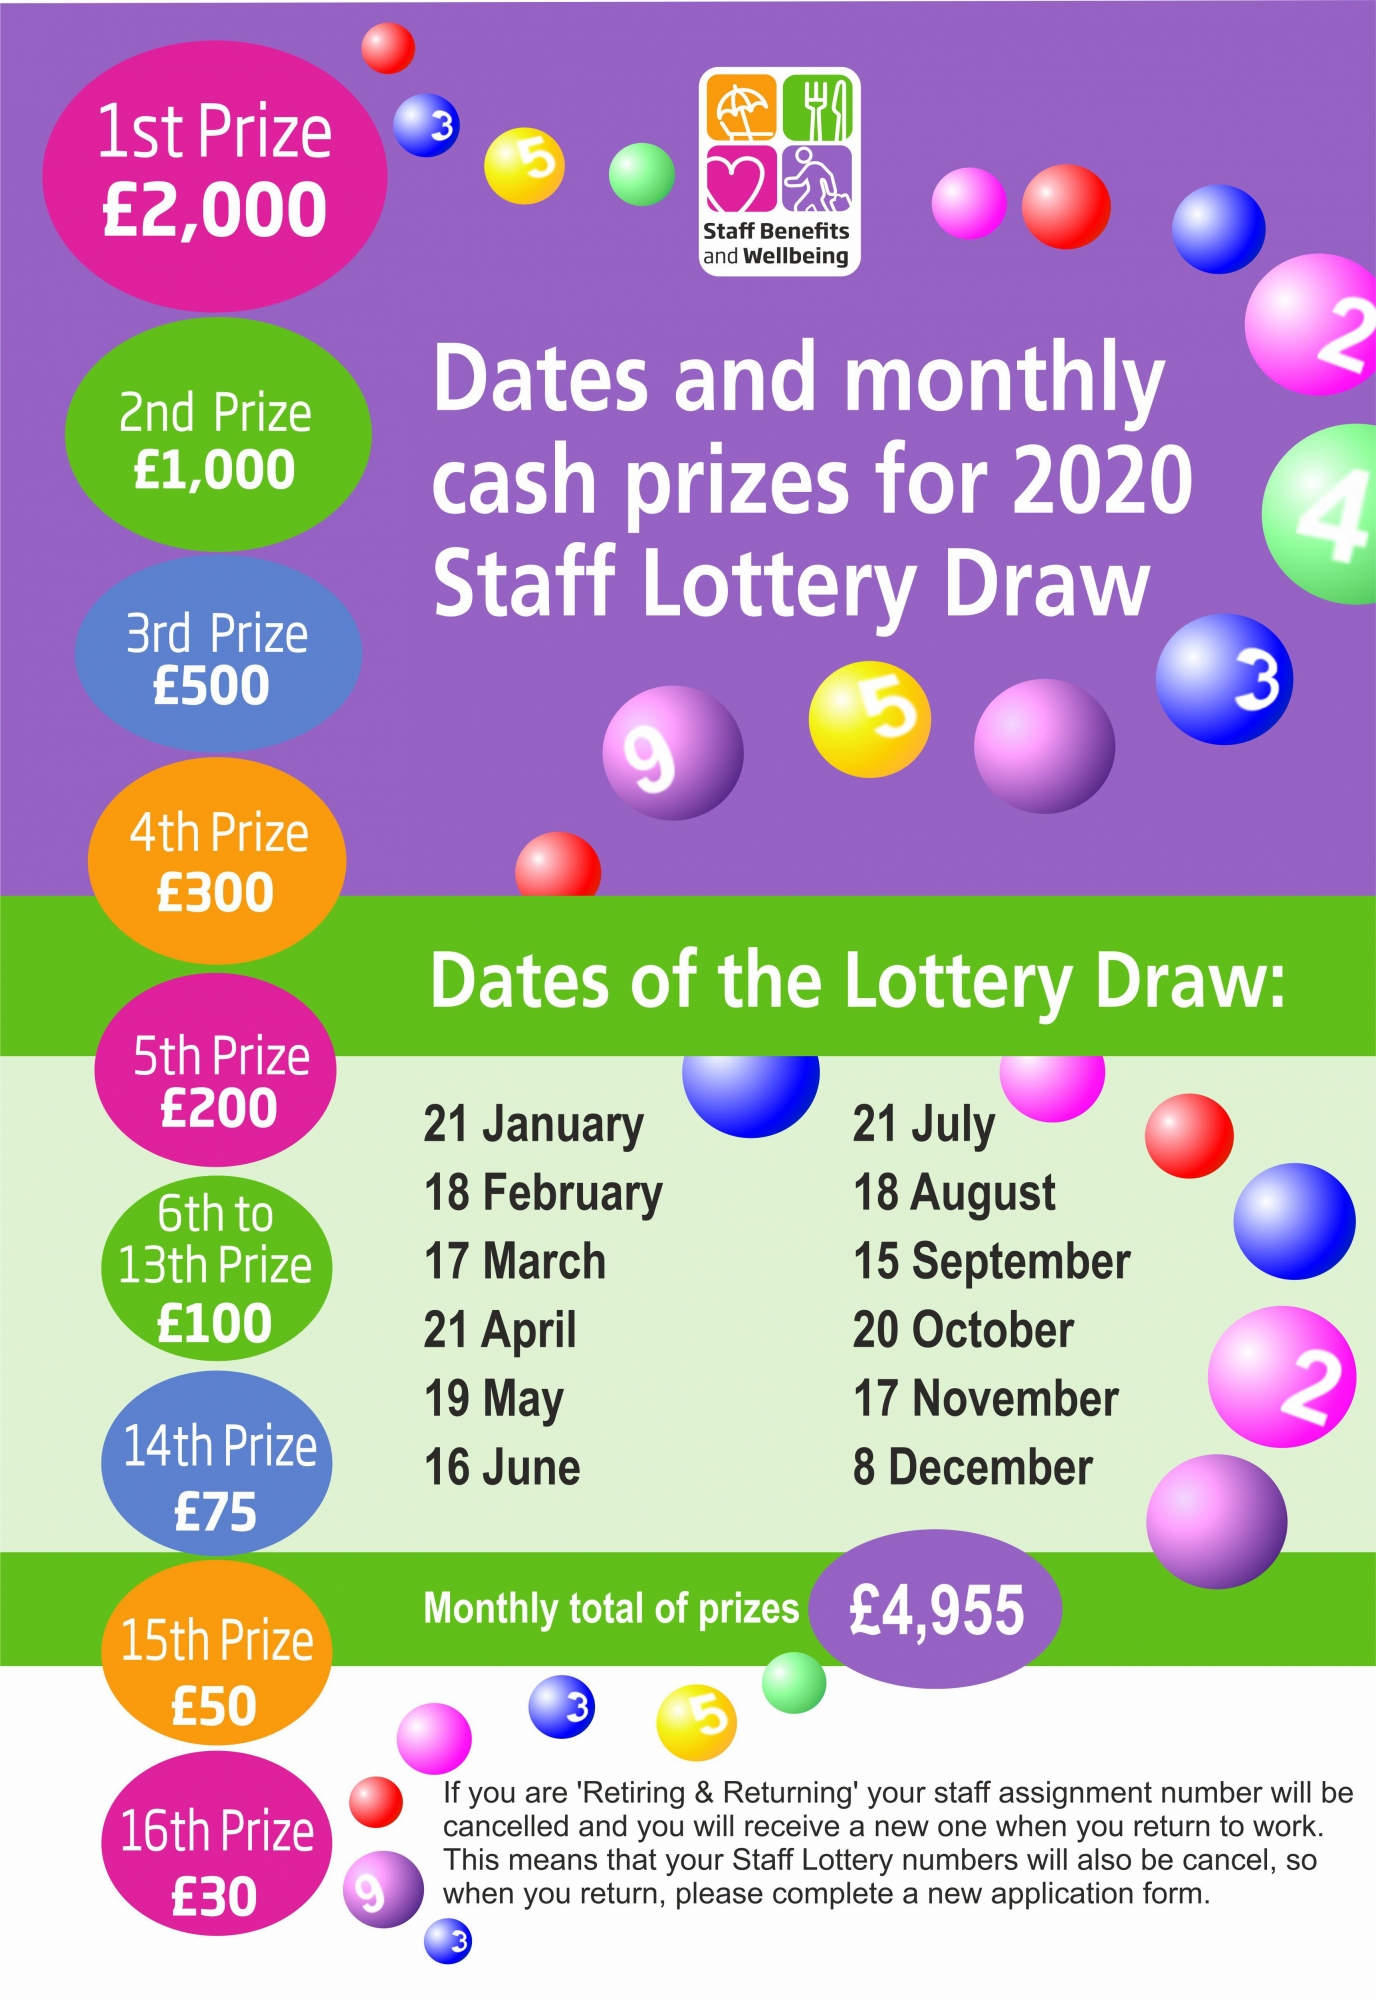 York Teaching Hospital NHS Foundation Trust Prizes and Draw Dates